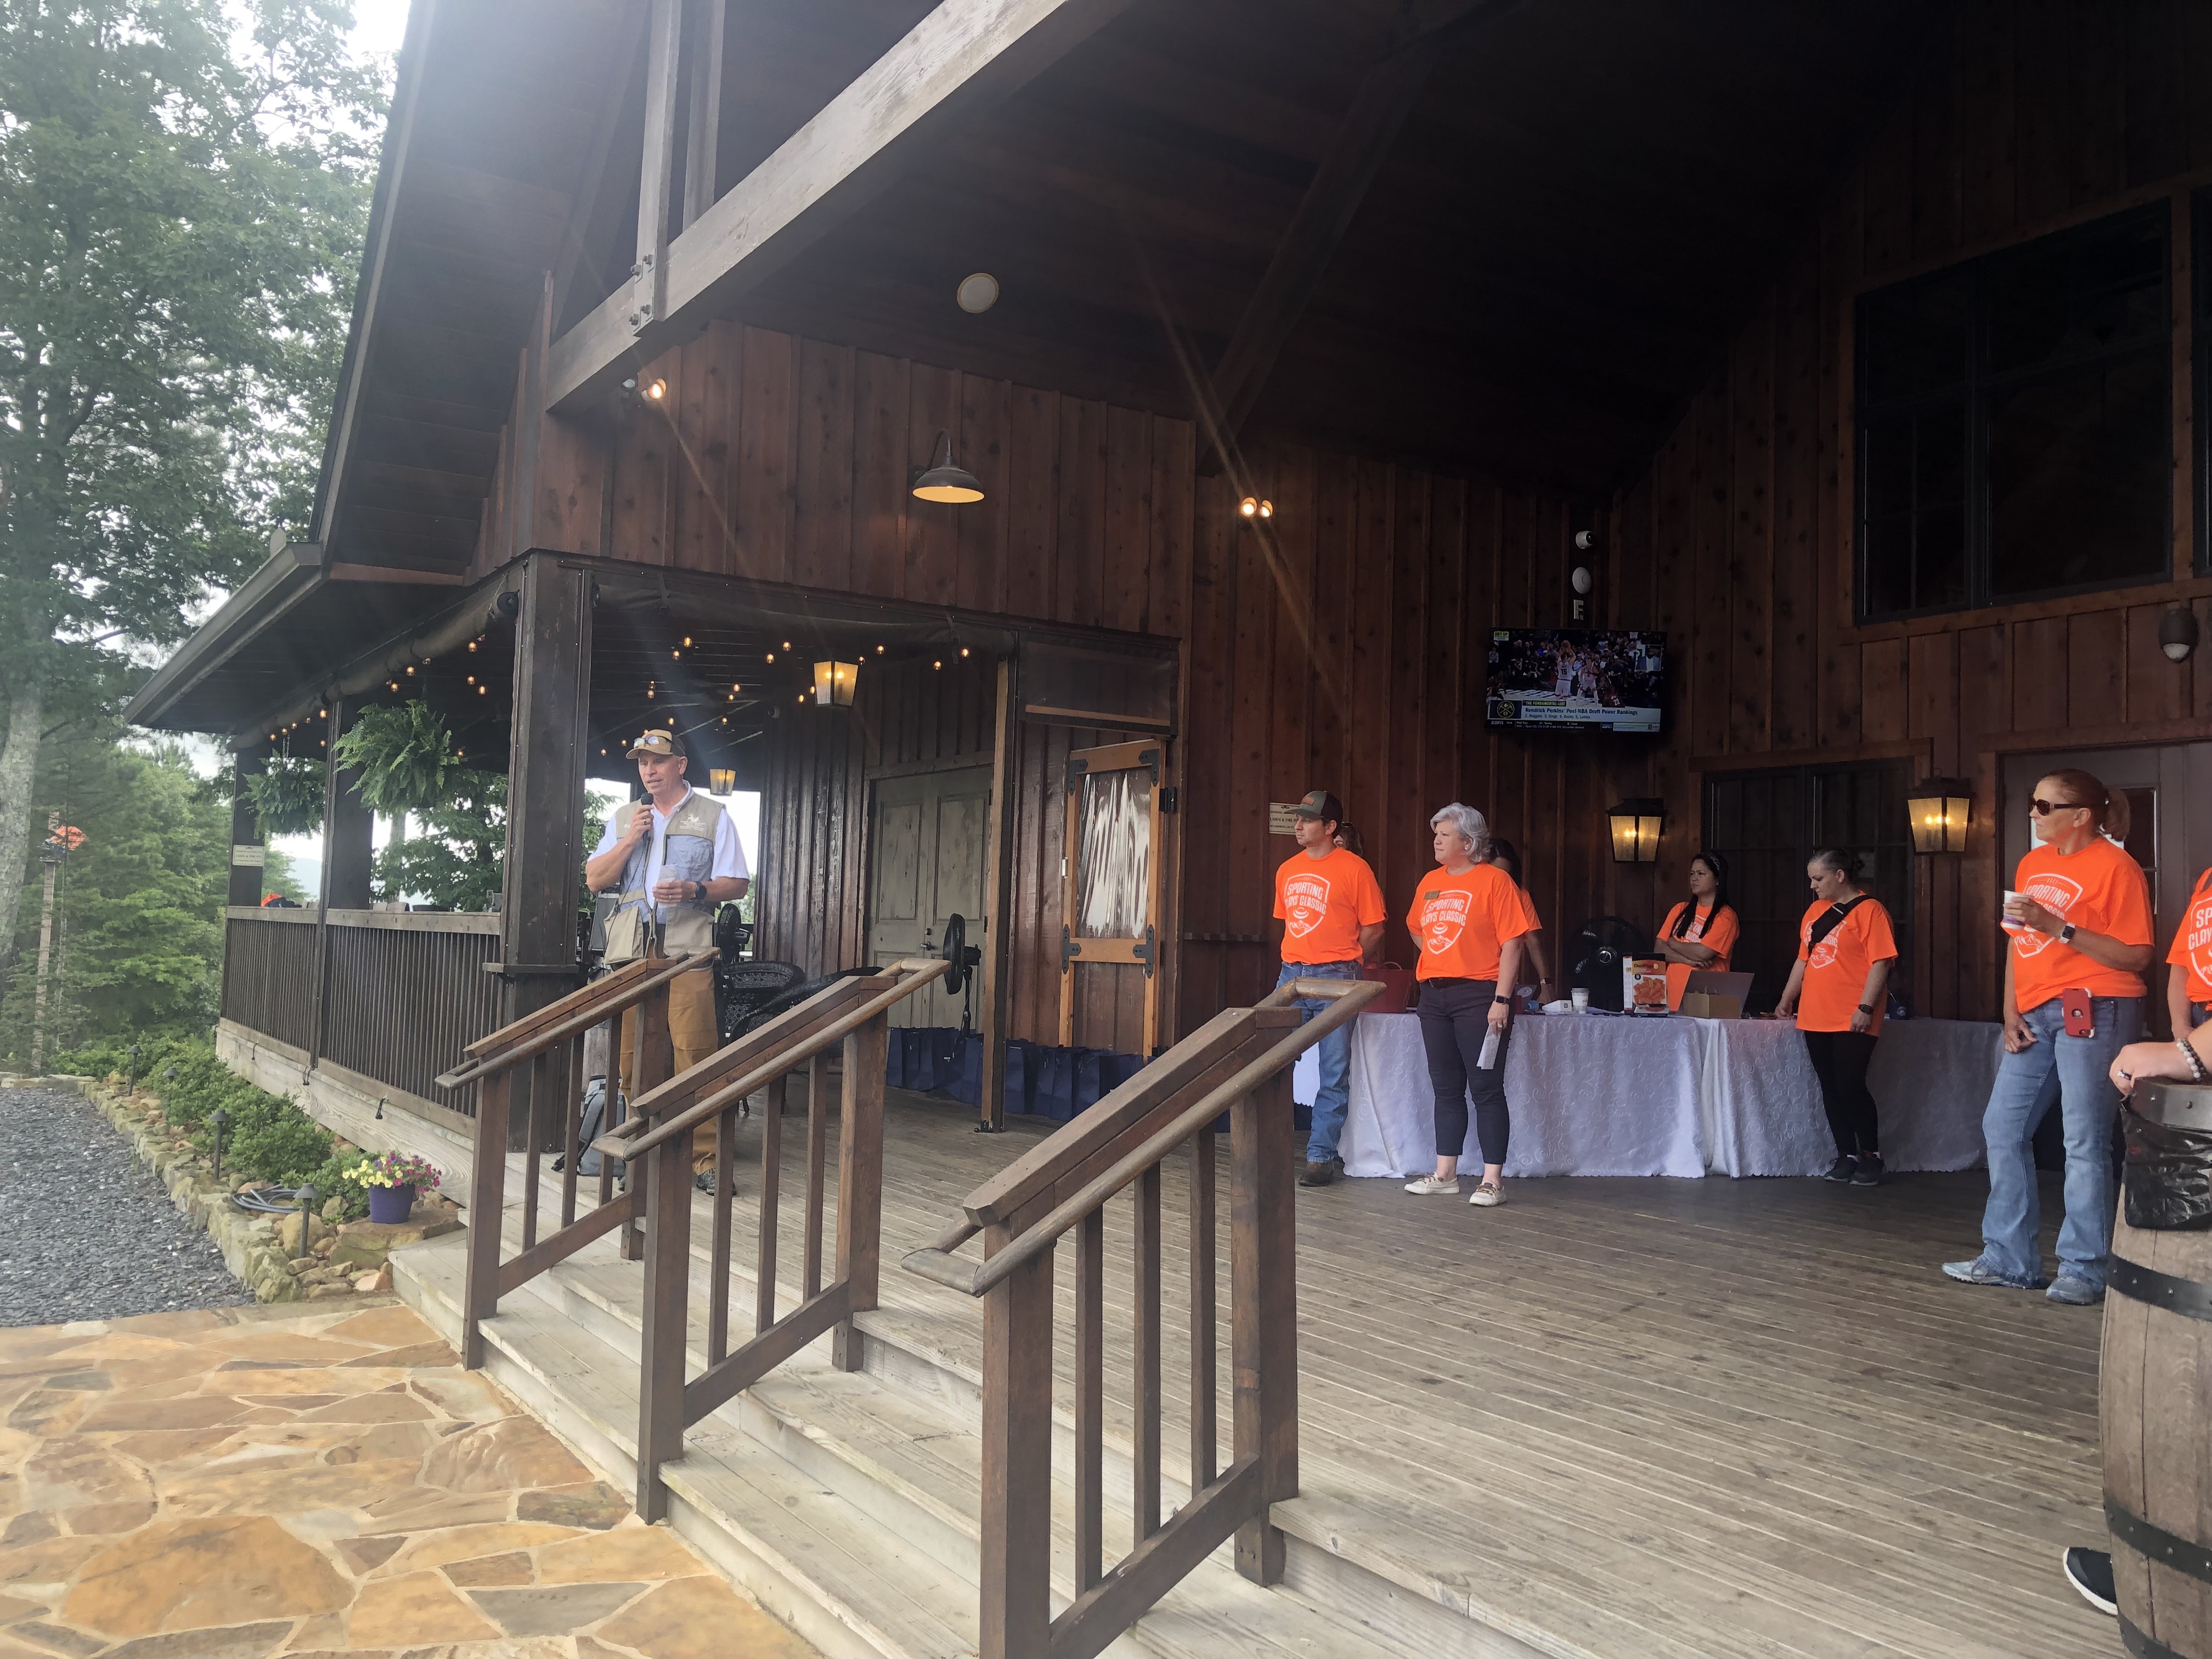 Scenes from the 2023 CCEF Sporting Clays Classic, taking place on June 23rd, 2023.